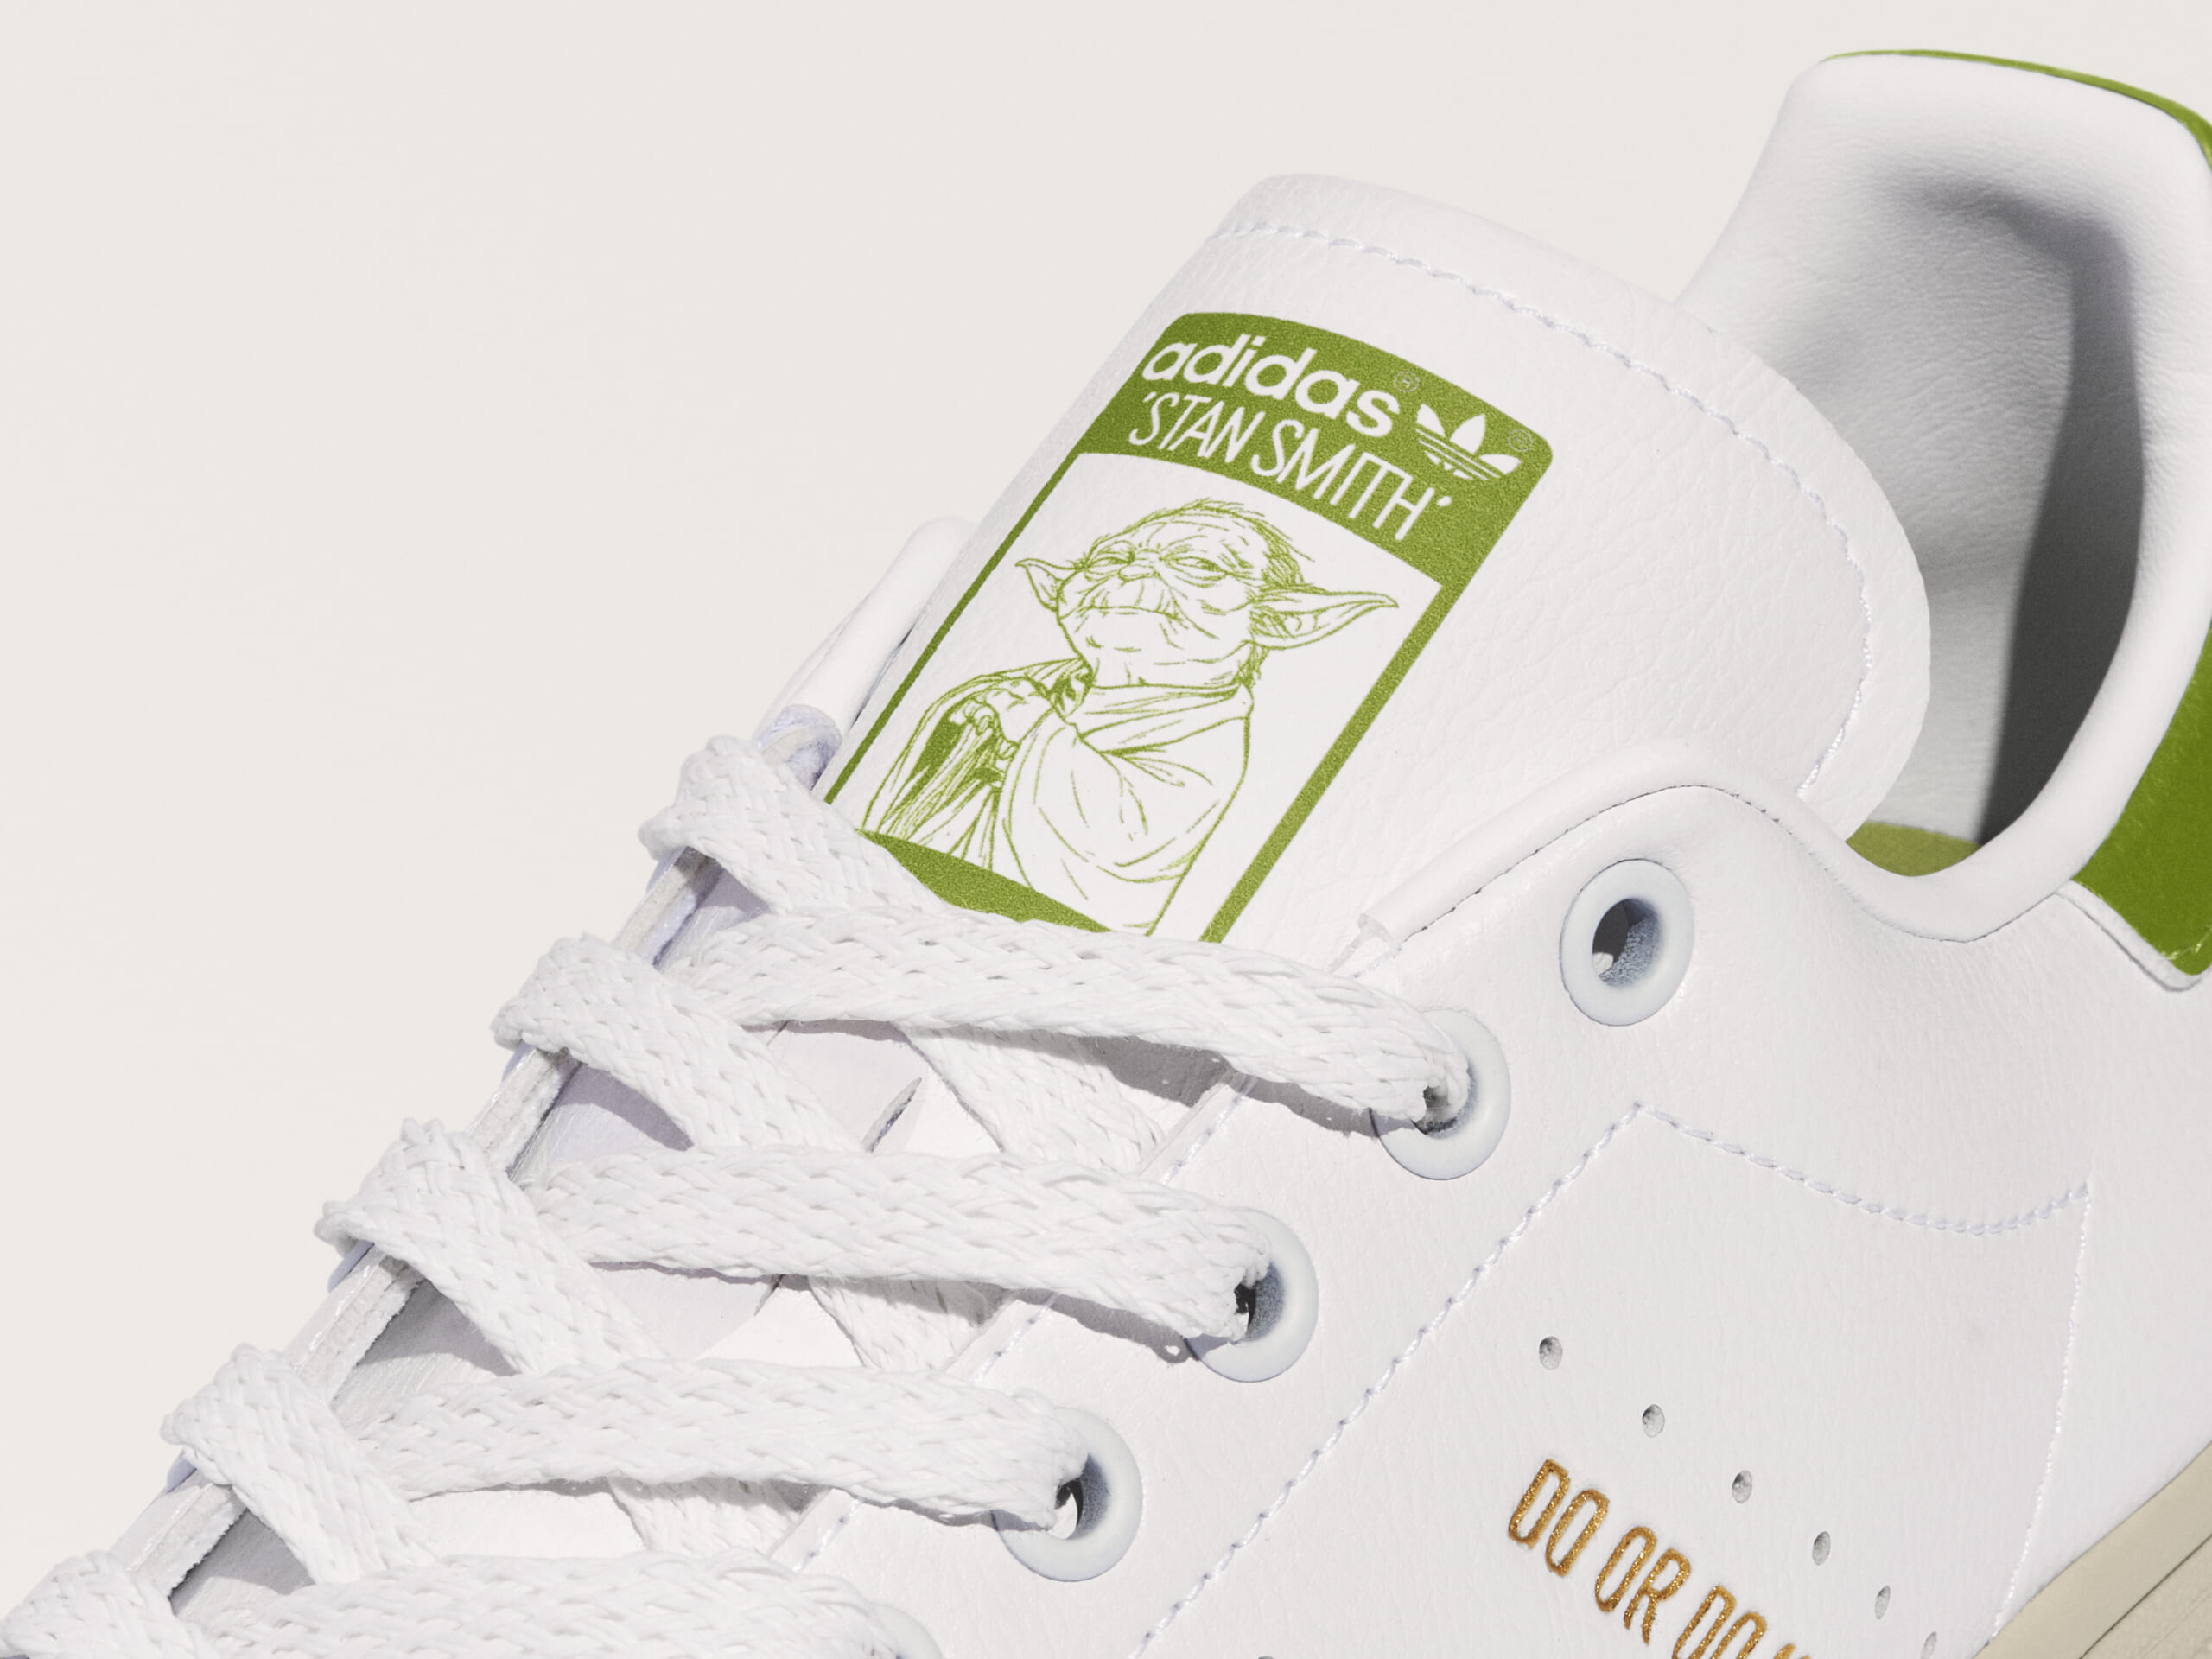 Feel The Force With Adidas Yoda Shoes - Shoe Effect